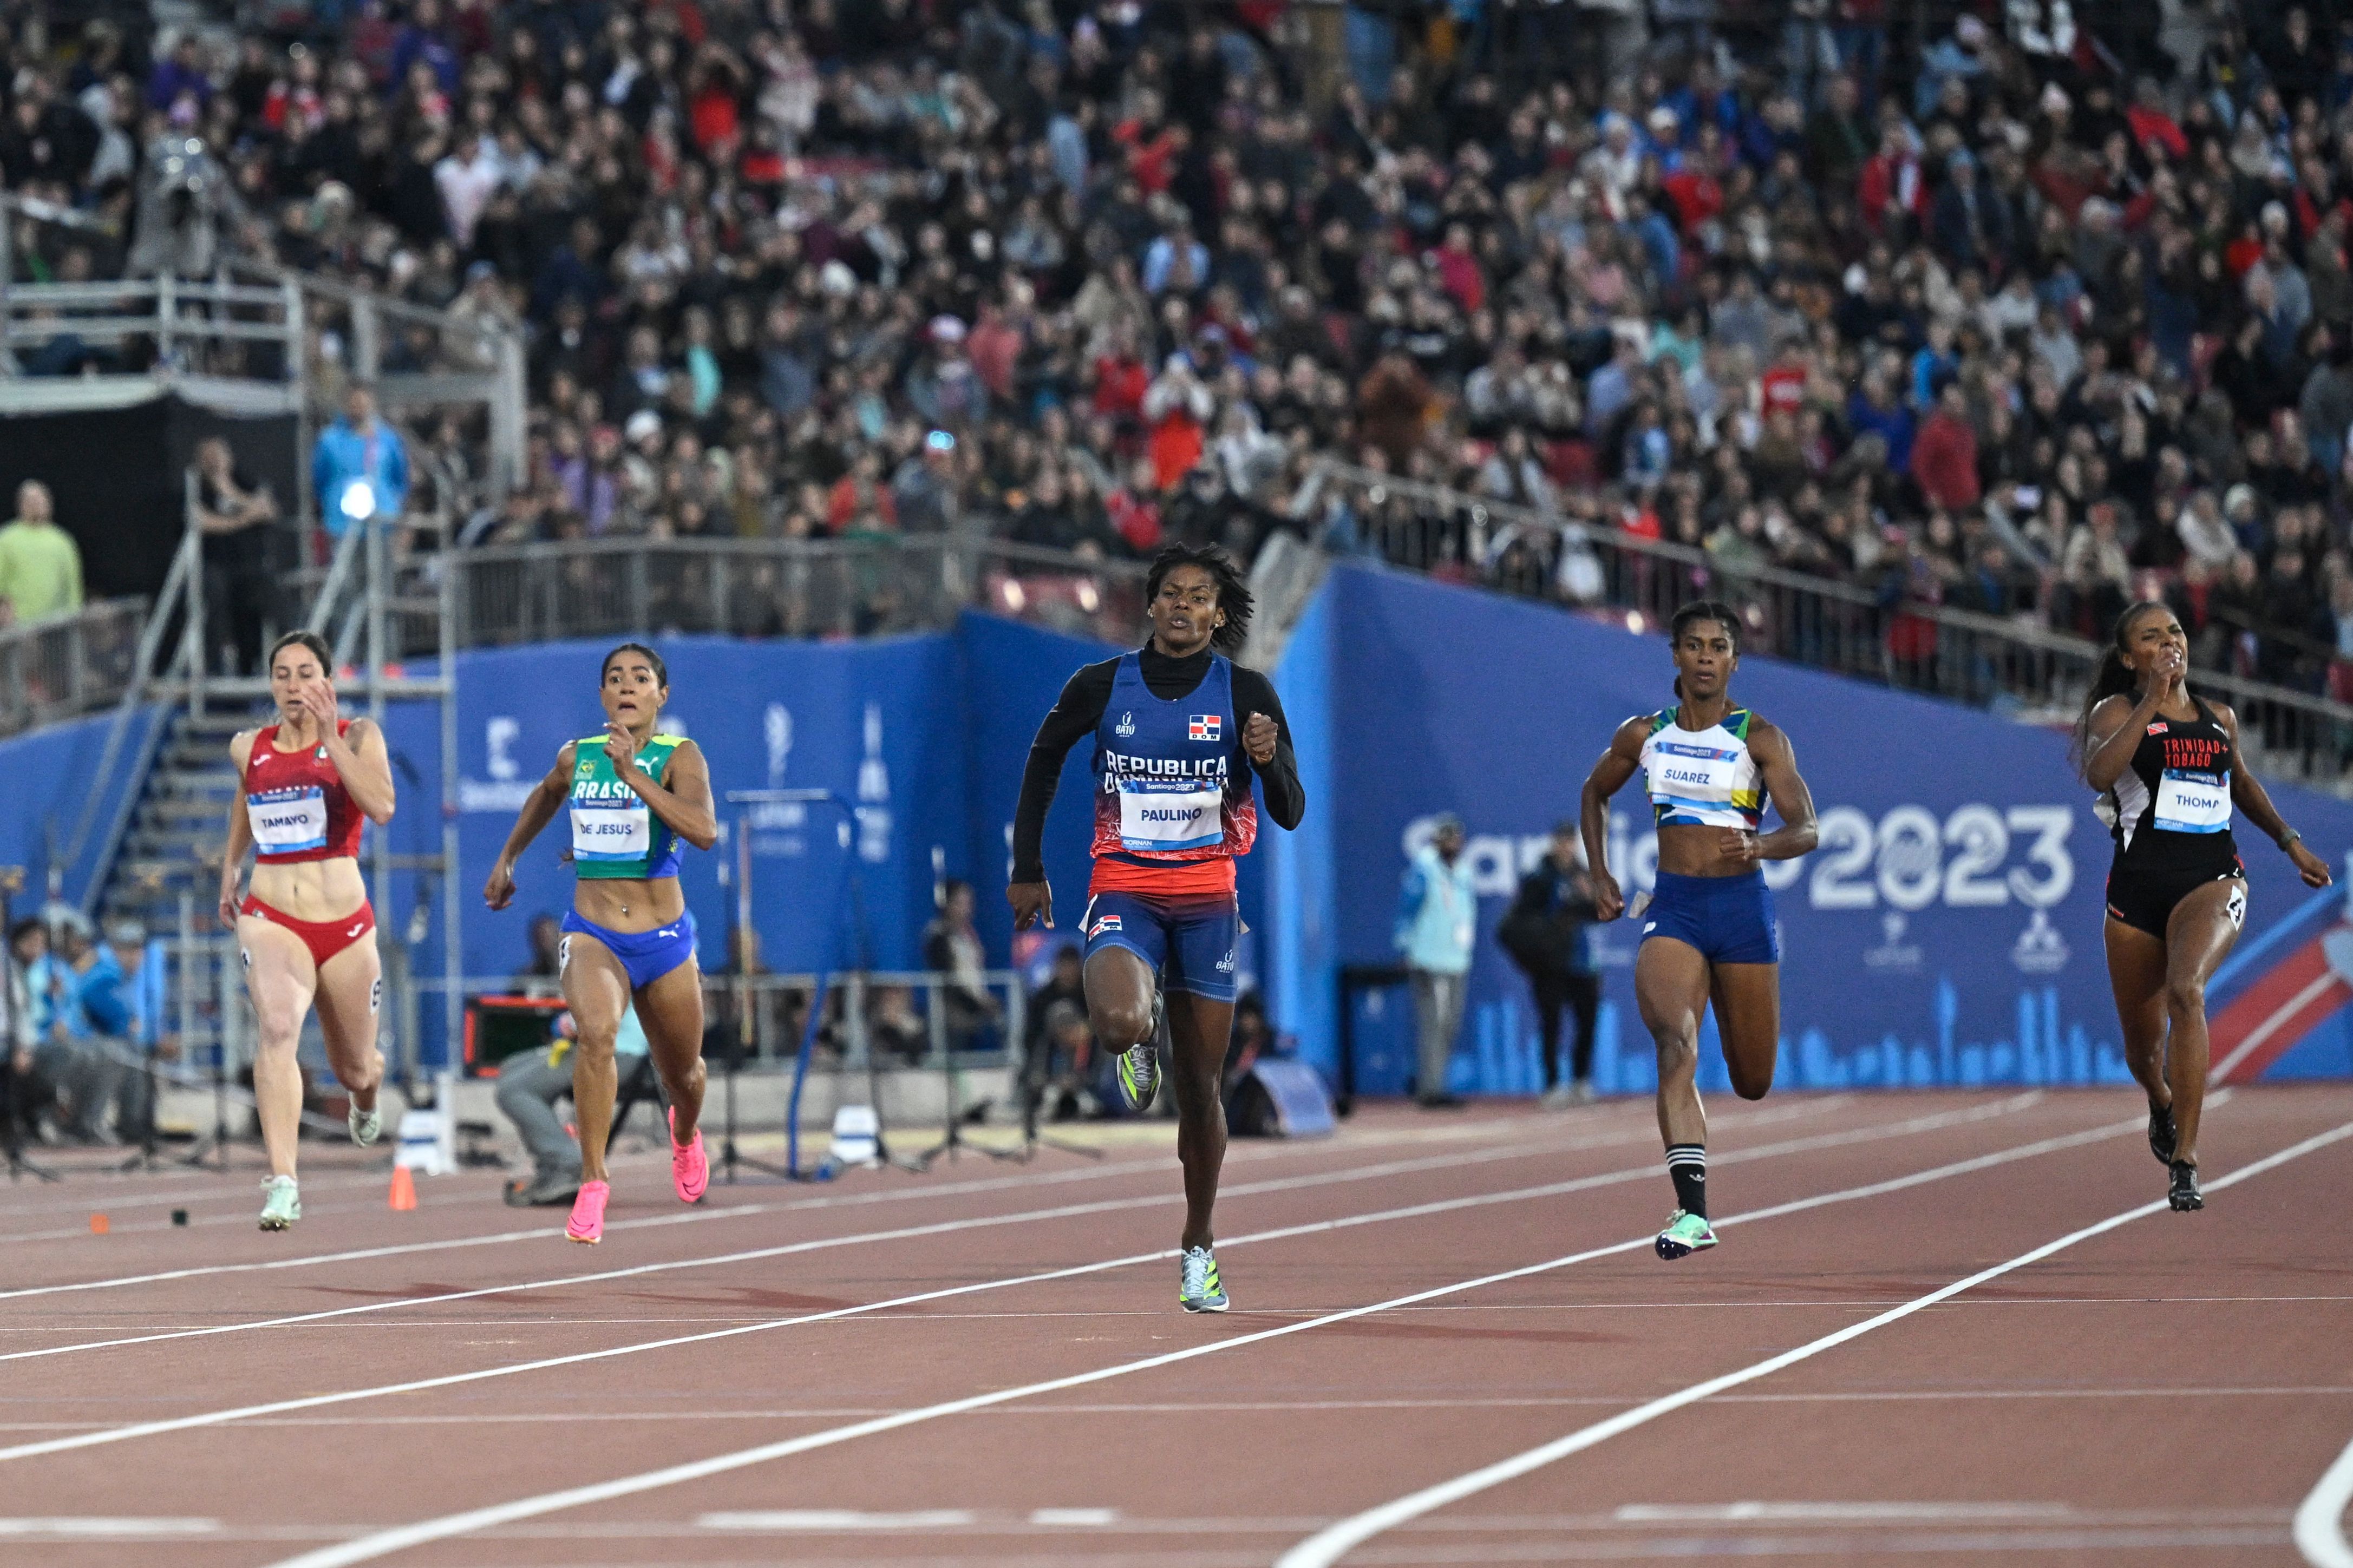 Marileidy Paulino on her way to a 200m win at the Pan American Games